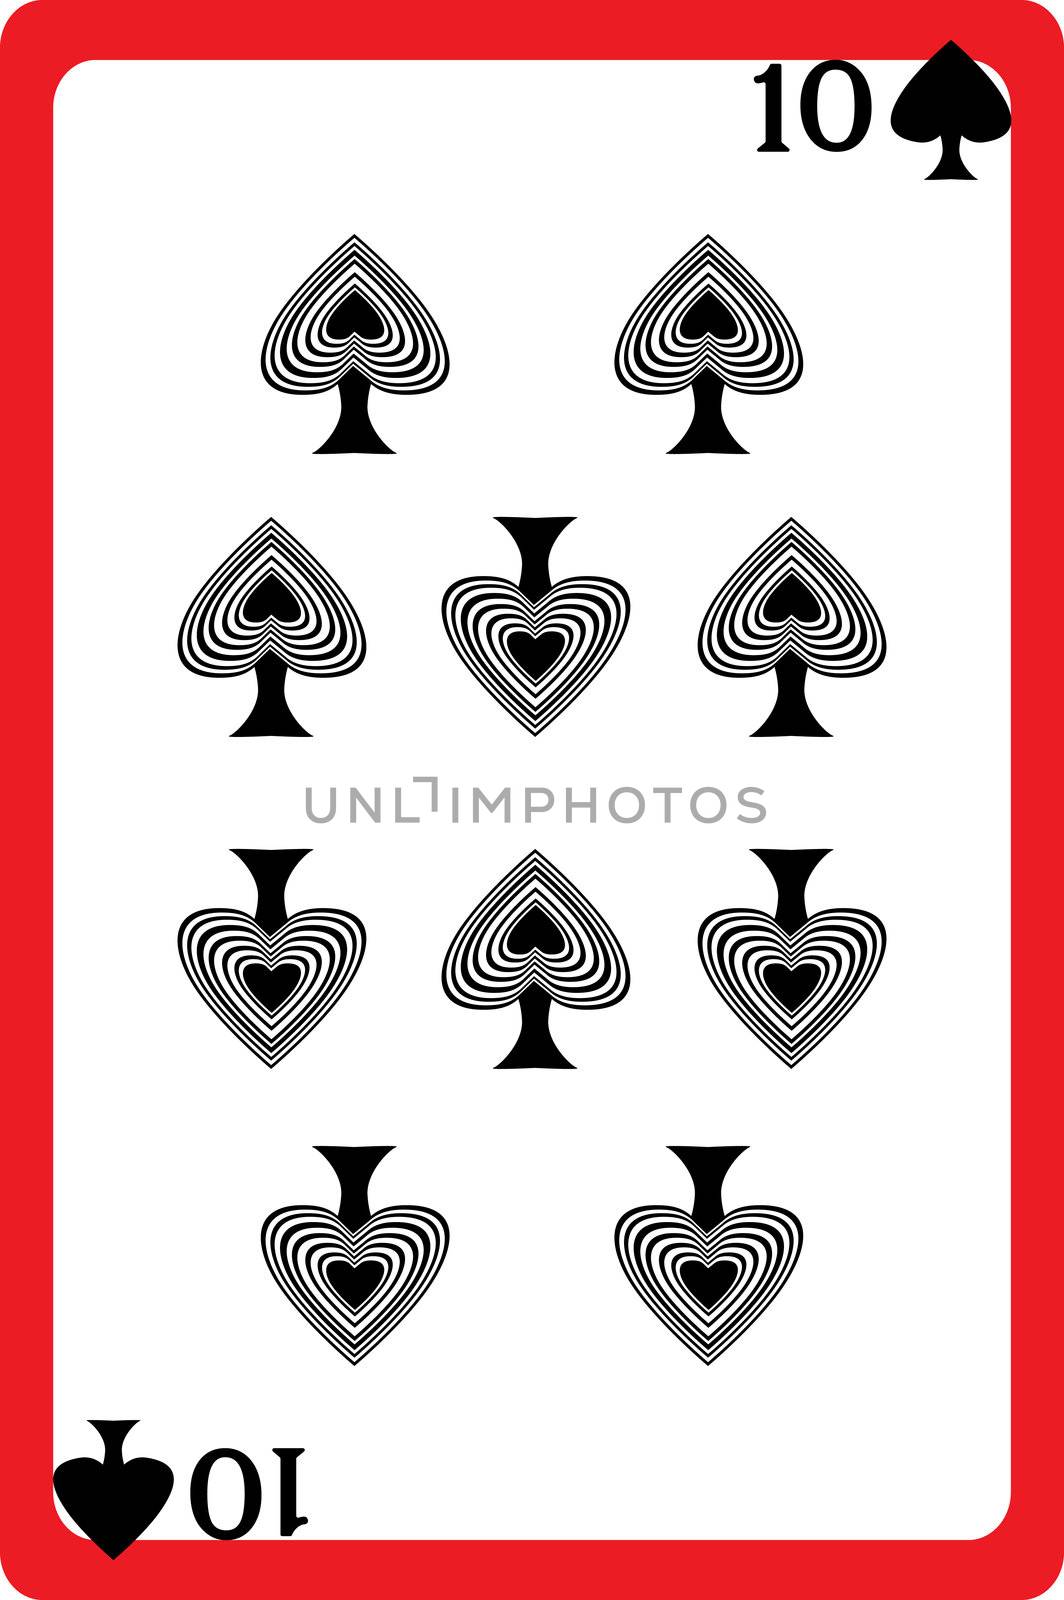 Scale hand drawn illustration of a playing card representing the ten of spades, one element of a deck